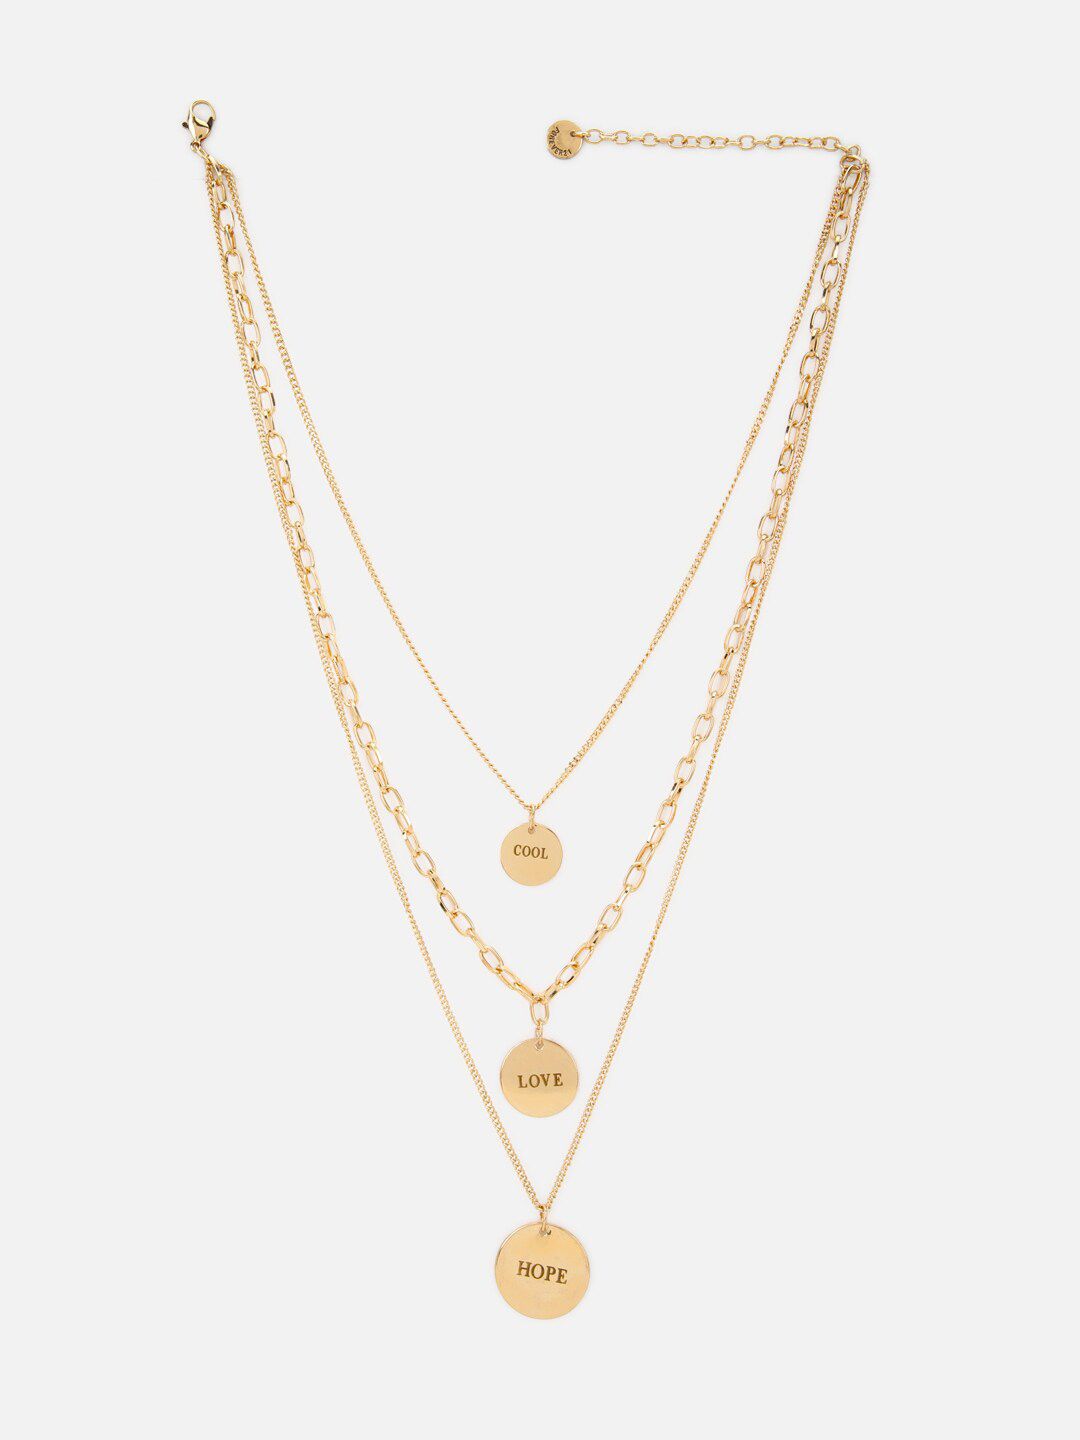 FOREVER 21 Gold-Toned Layered Necklace Price in India